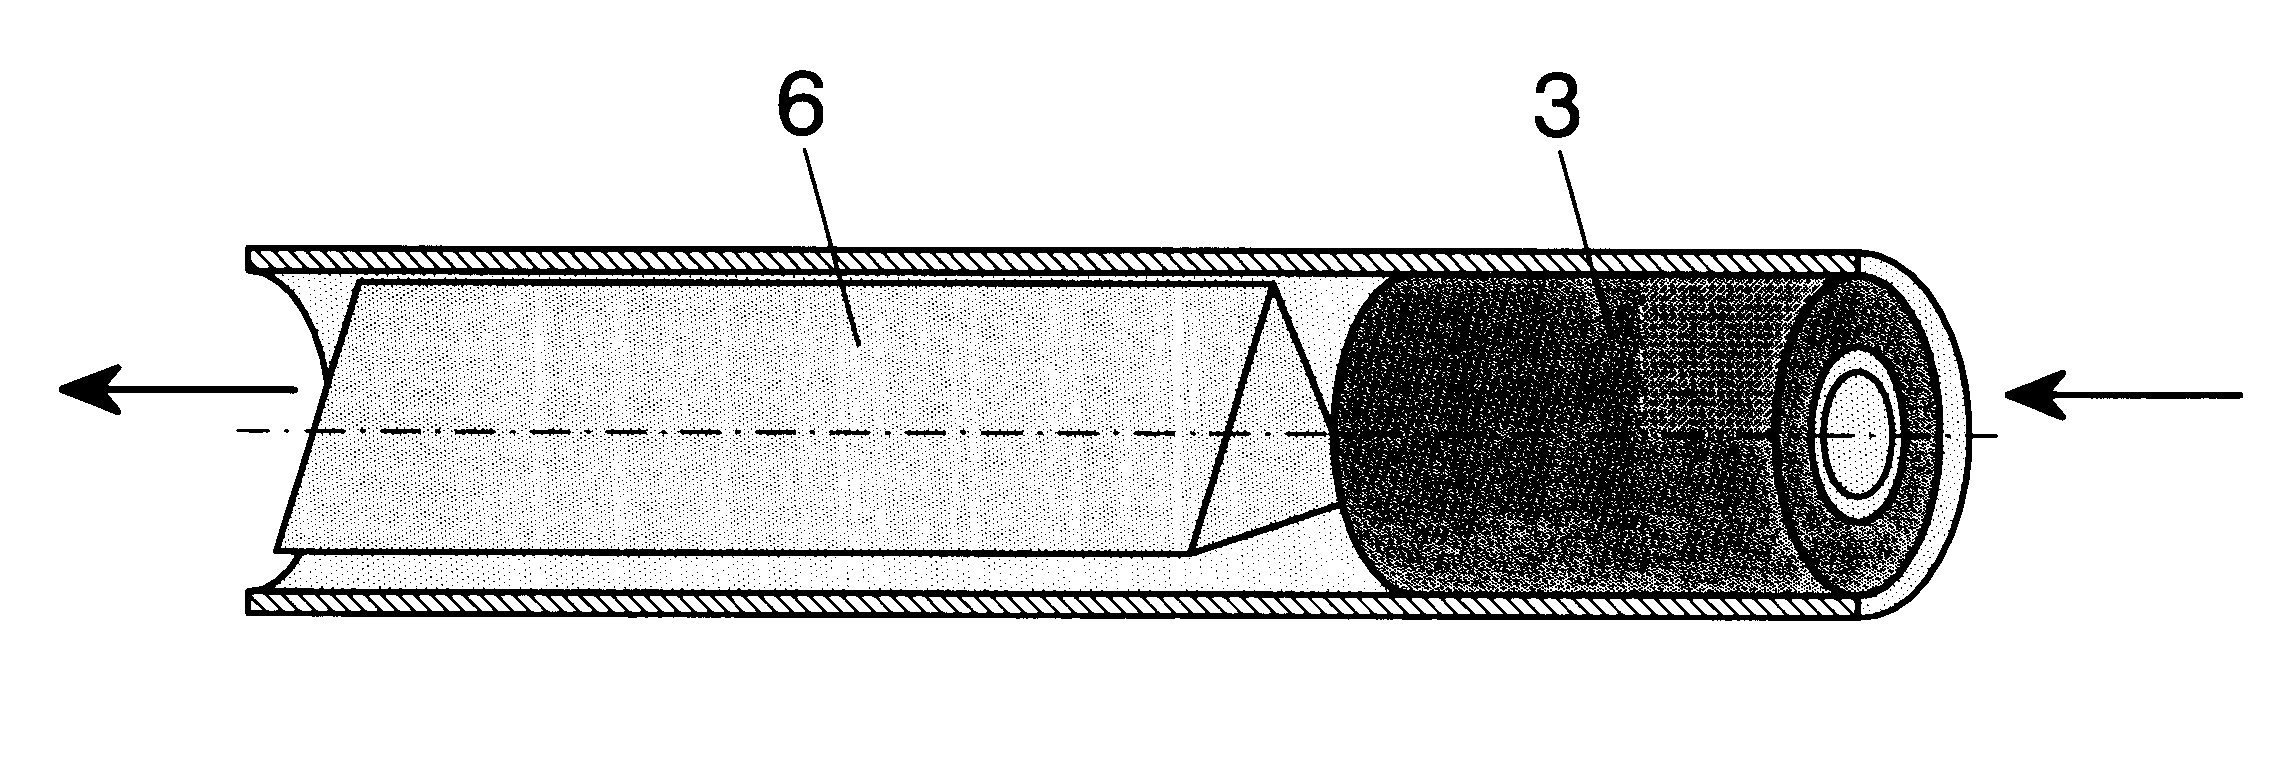 External magnetic actuation valve for intraurethral artificial urinary sphincter